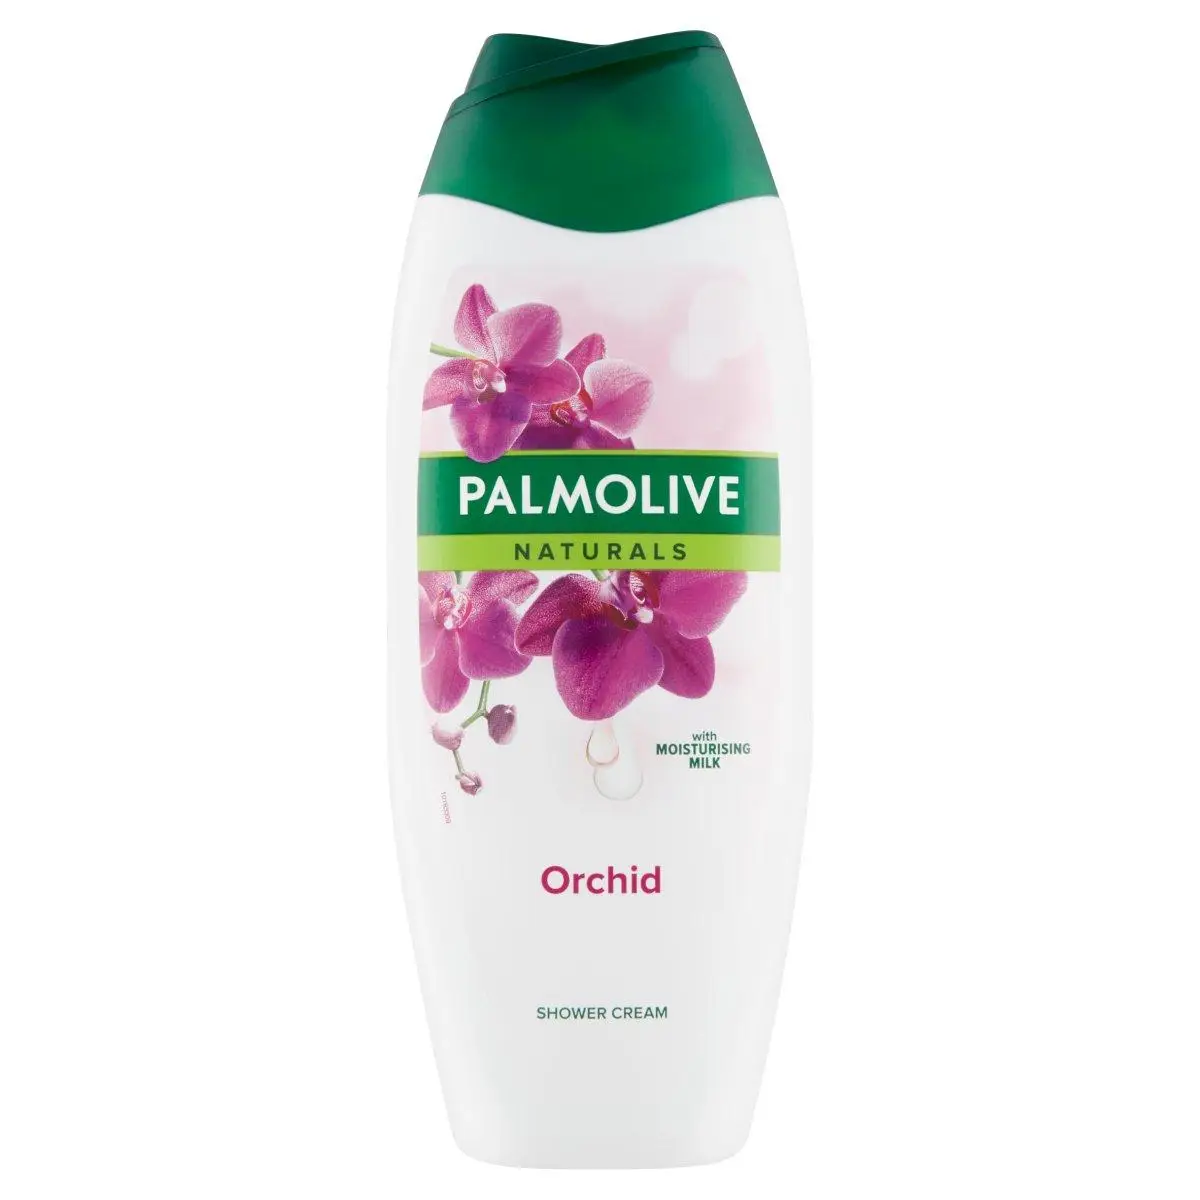 Shower gel Palmolive natural orchid and milk 500 ml